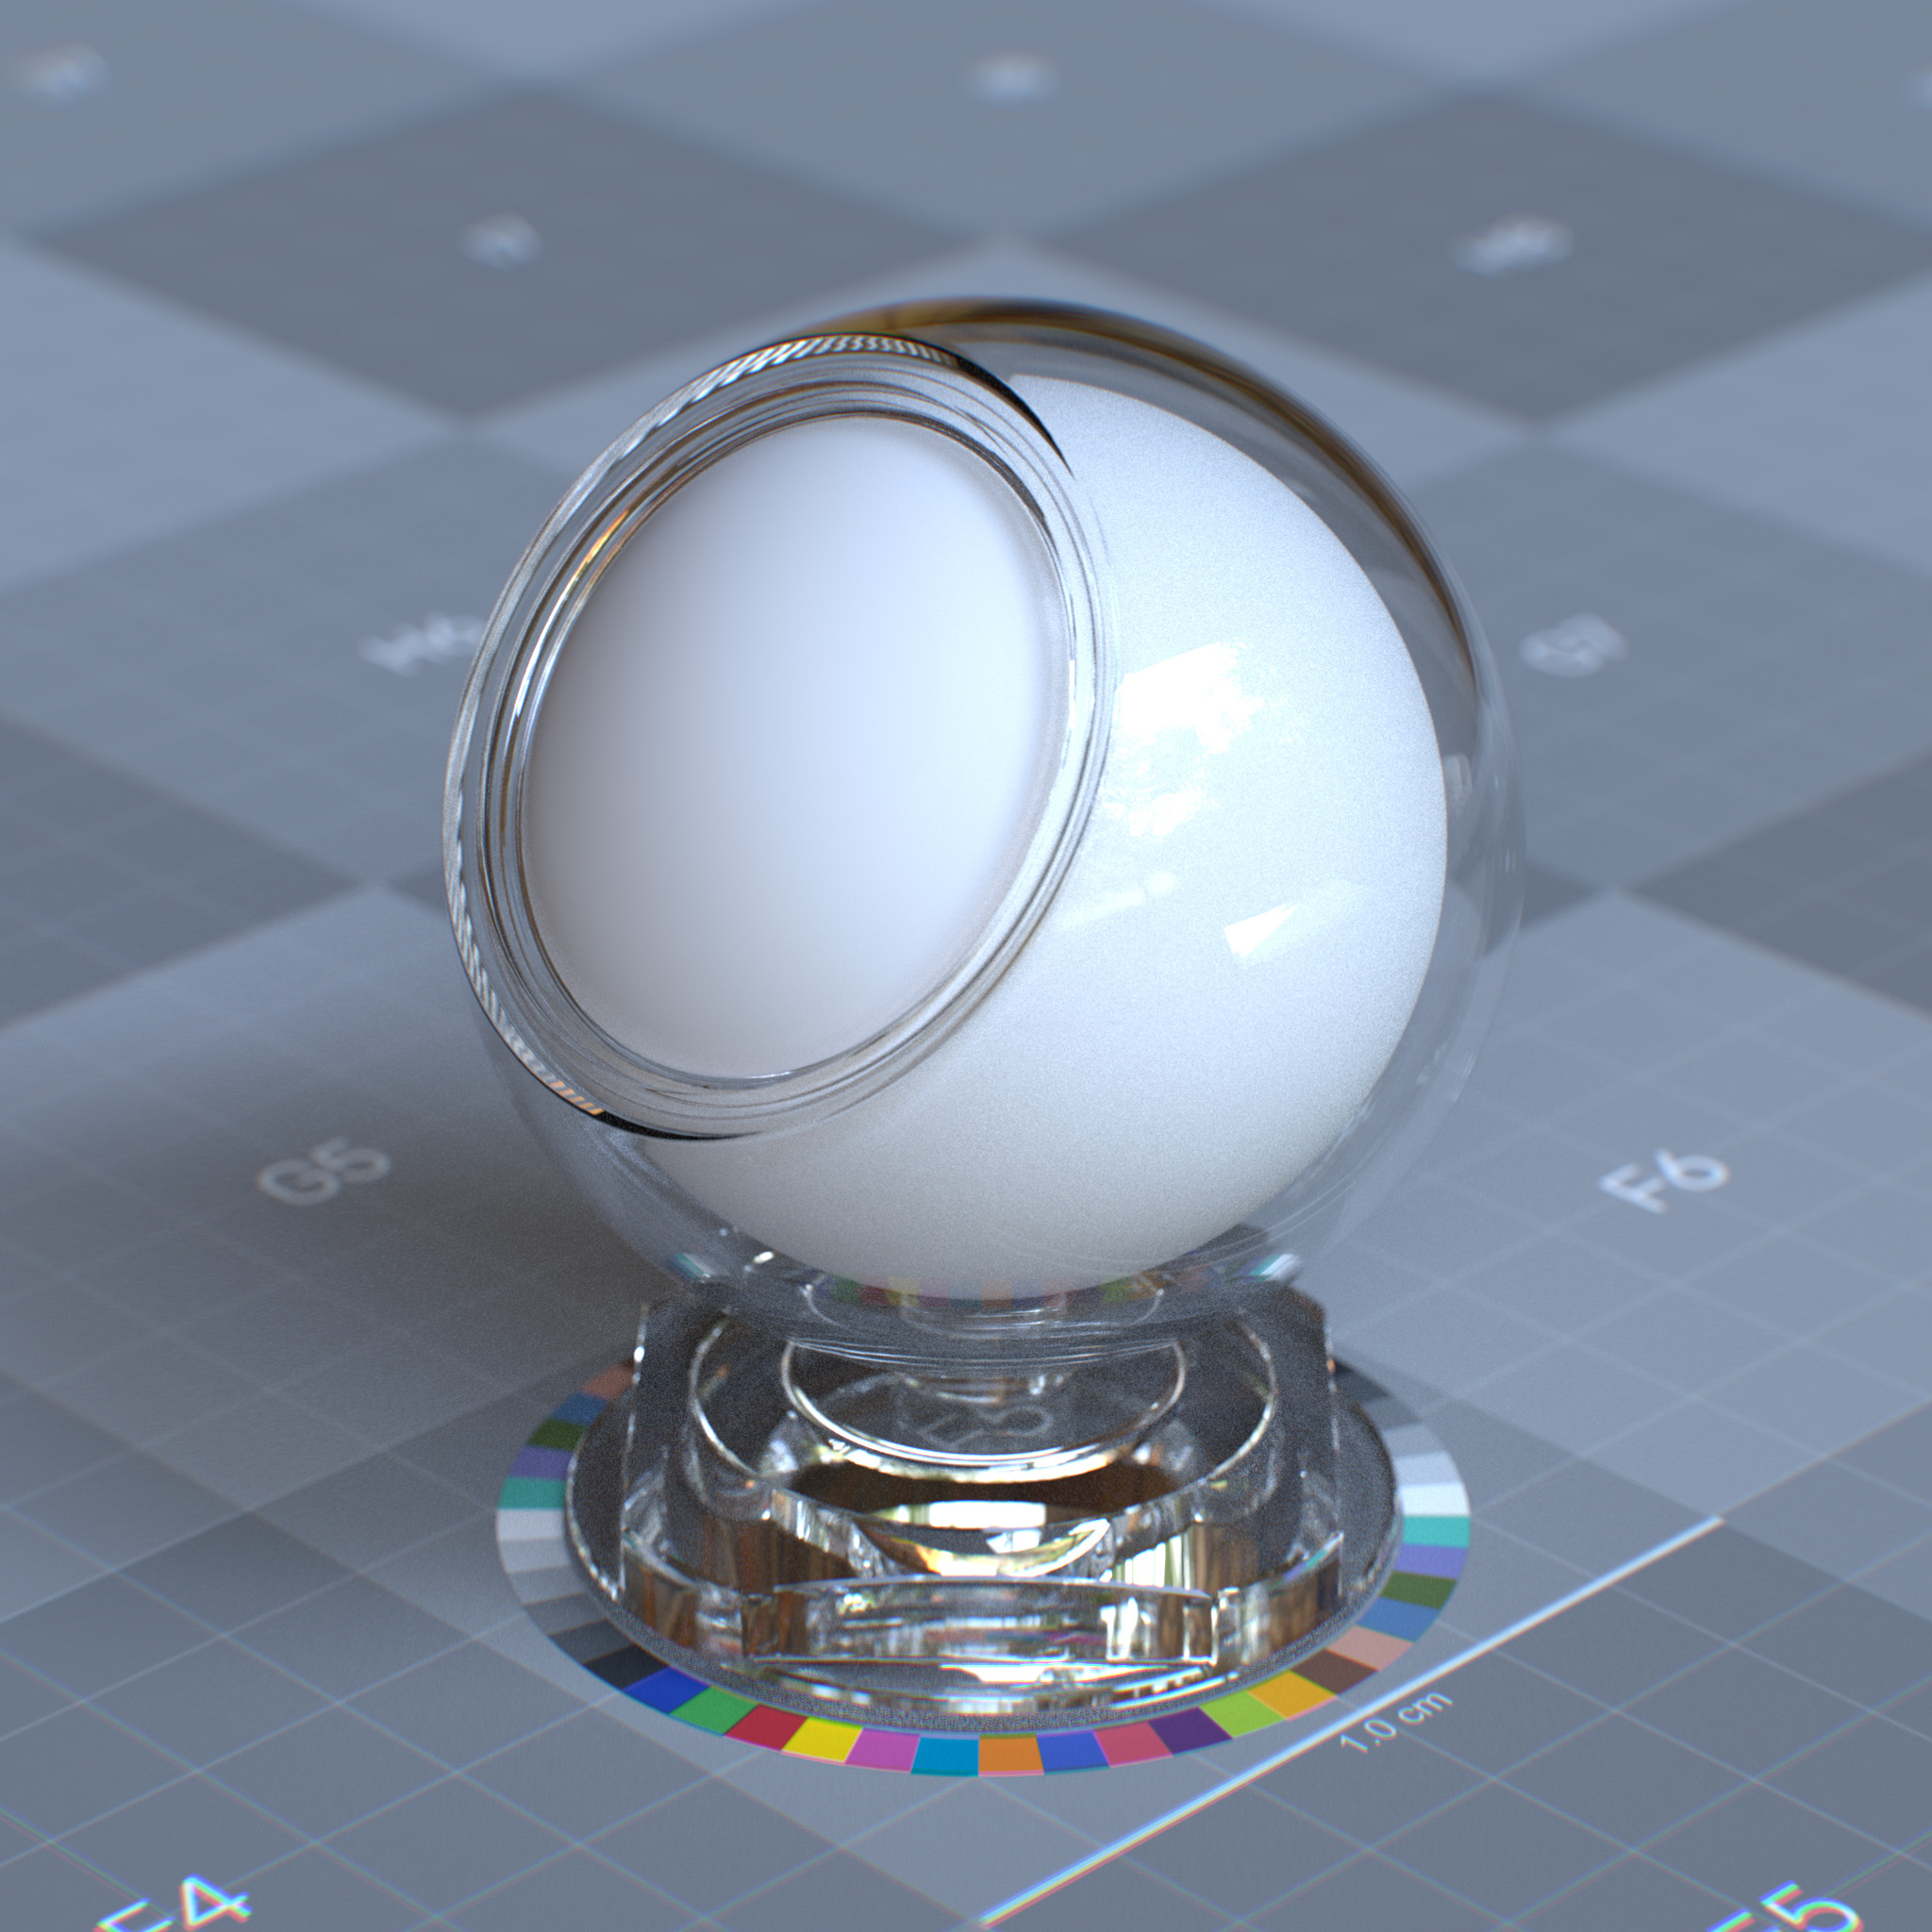 rtx_material_omnisurfacebase_specular_reflection_ior_1p5_refraction